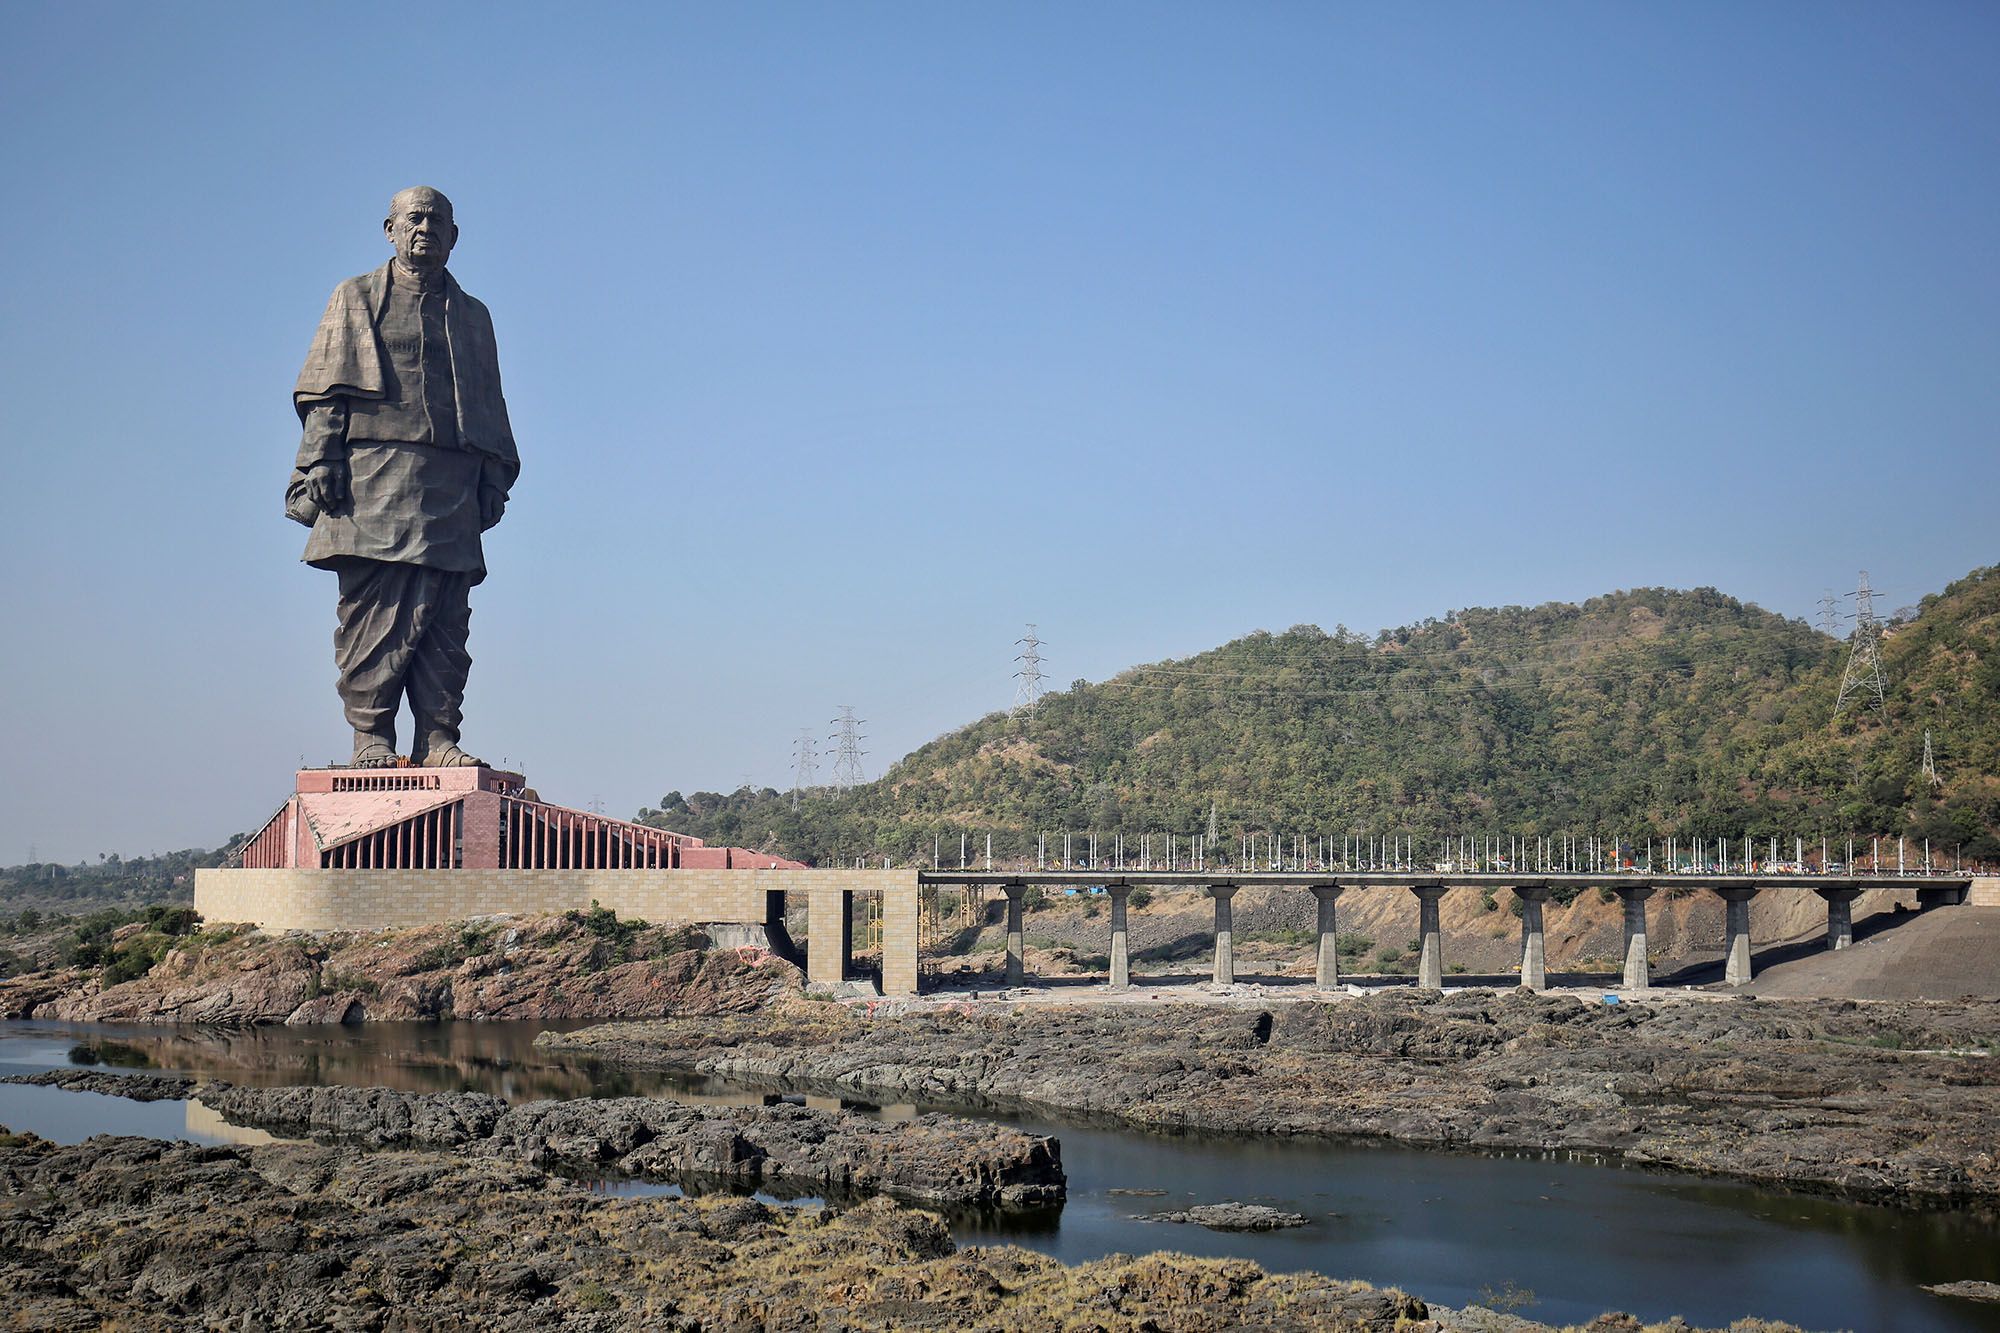 Photos: The 15 Tallest Statues in the World